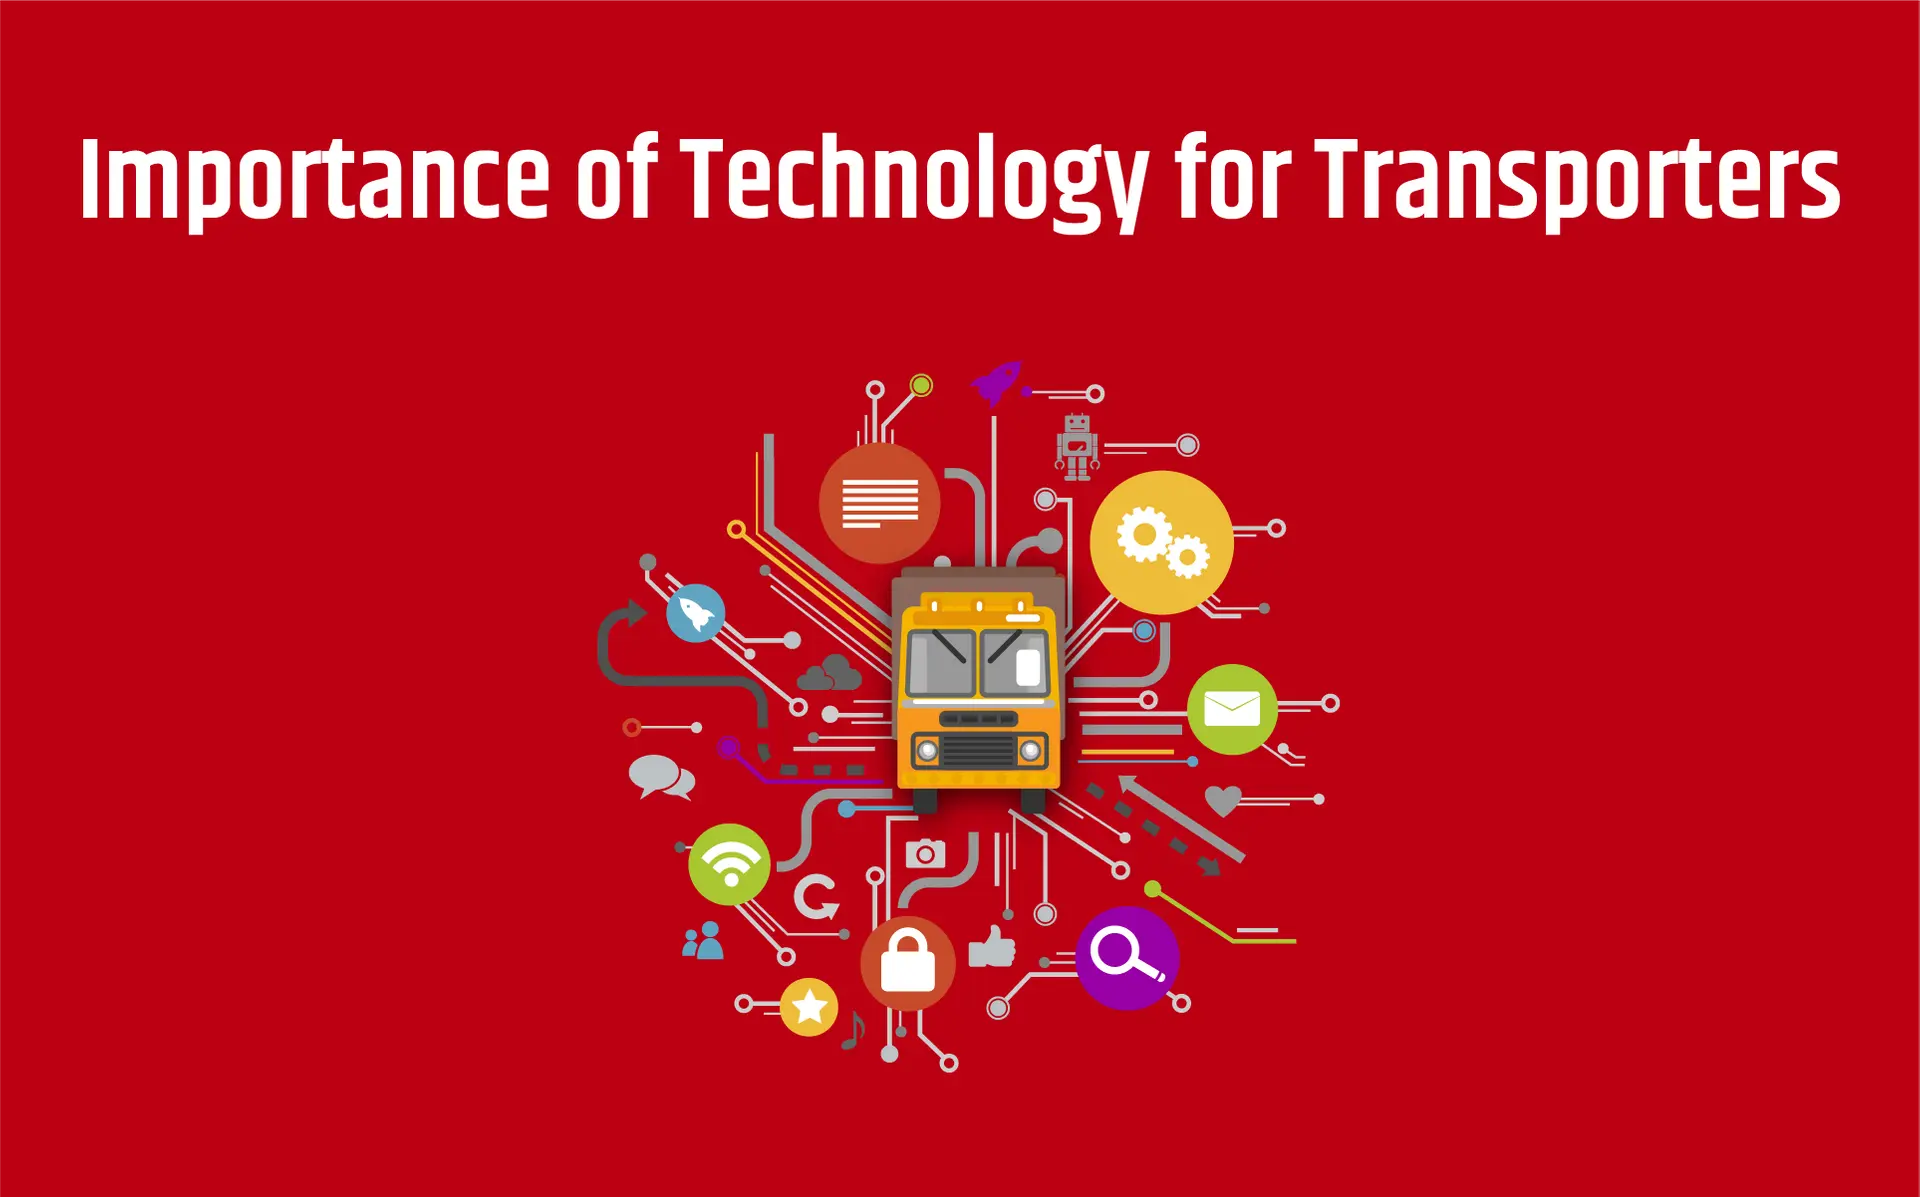 Why Is Digitization Important For Transport Services Providers?